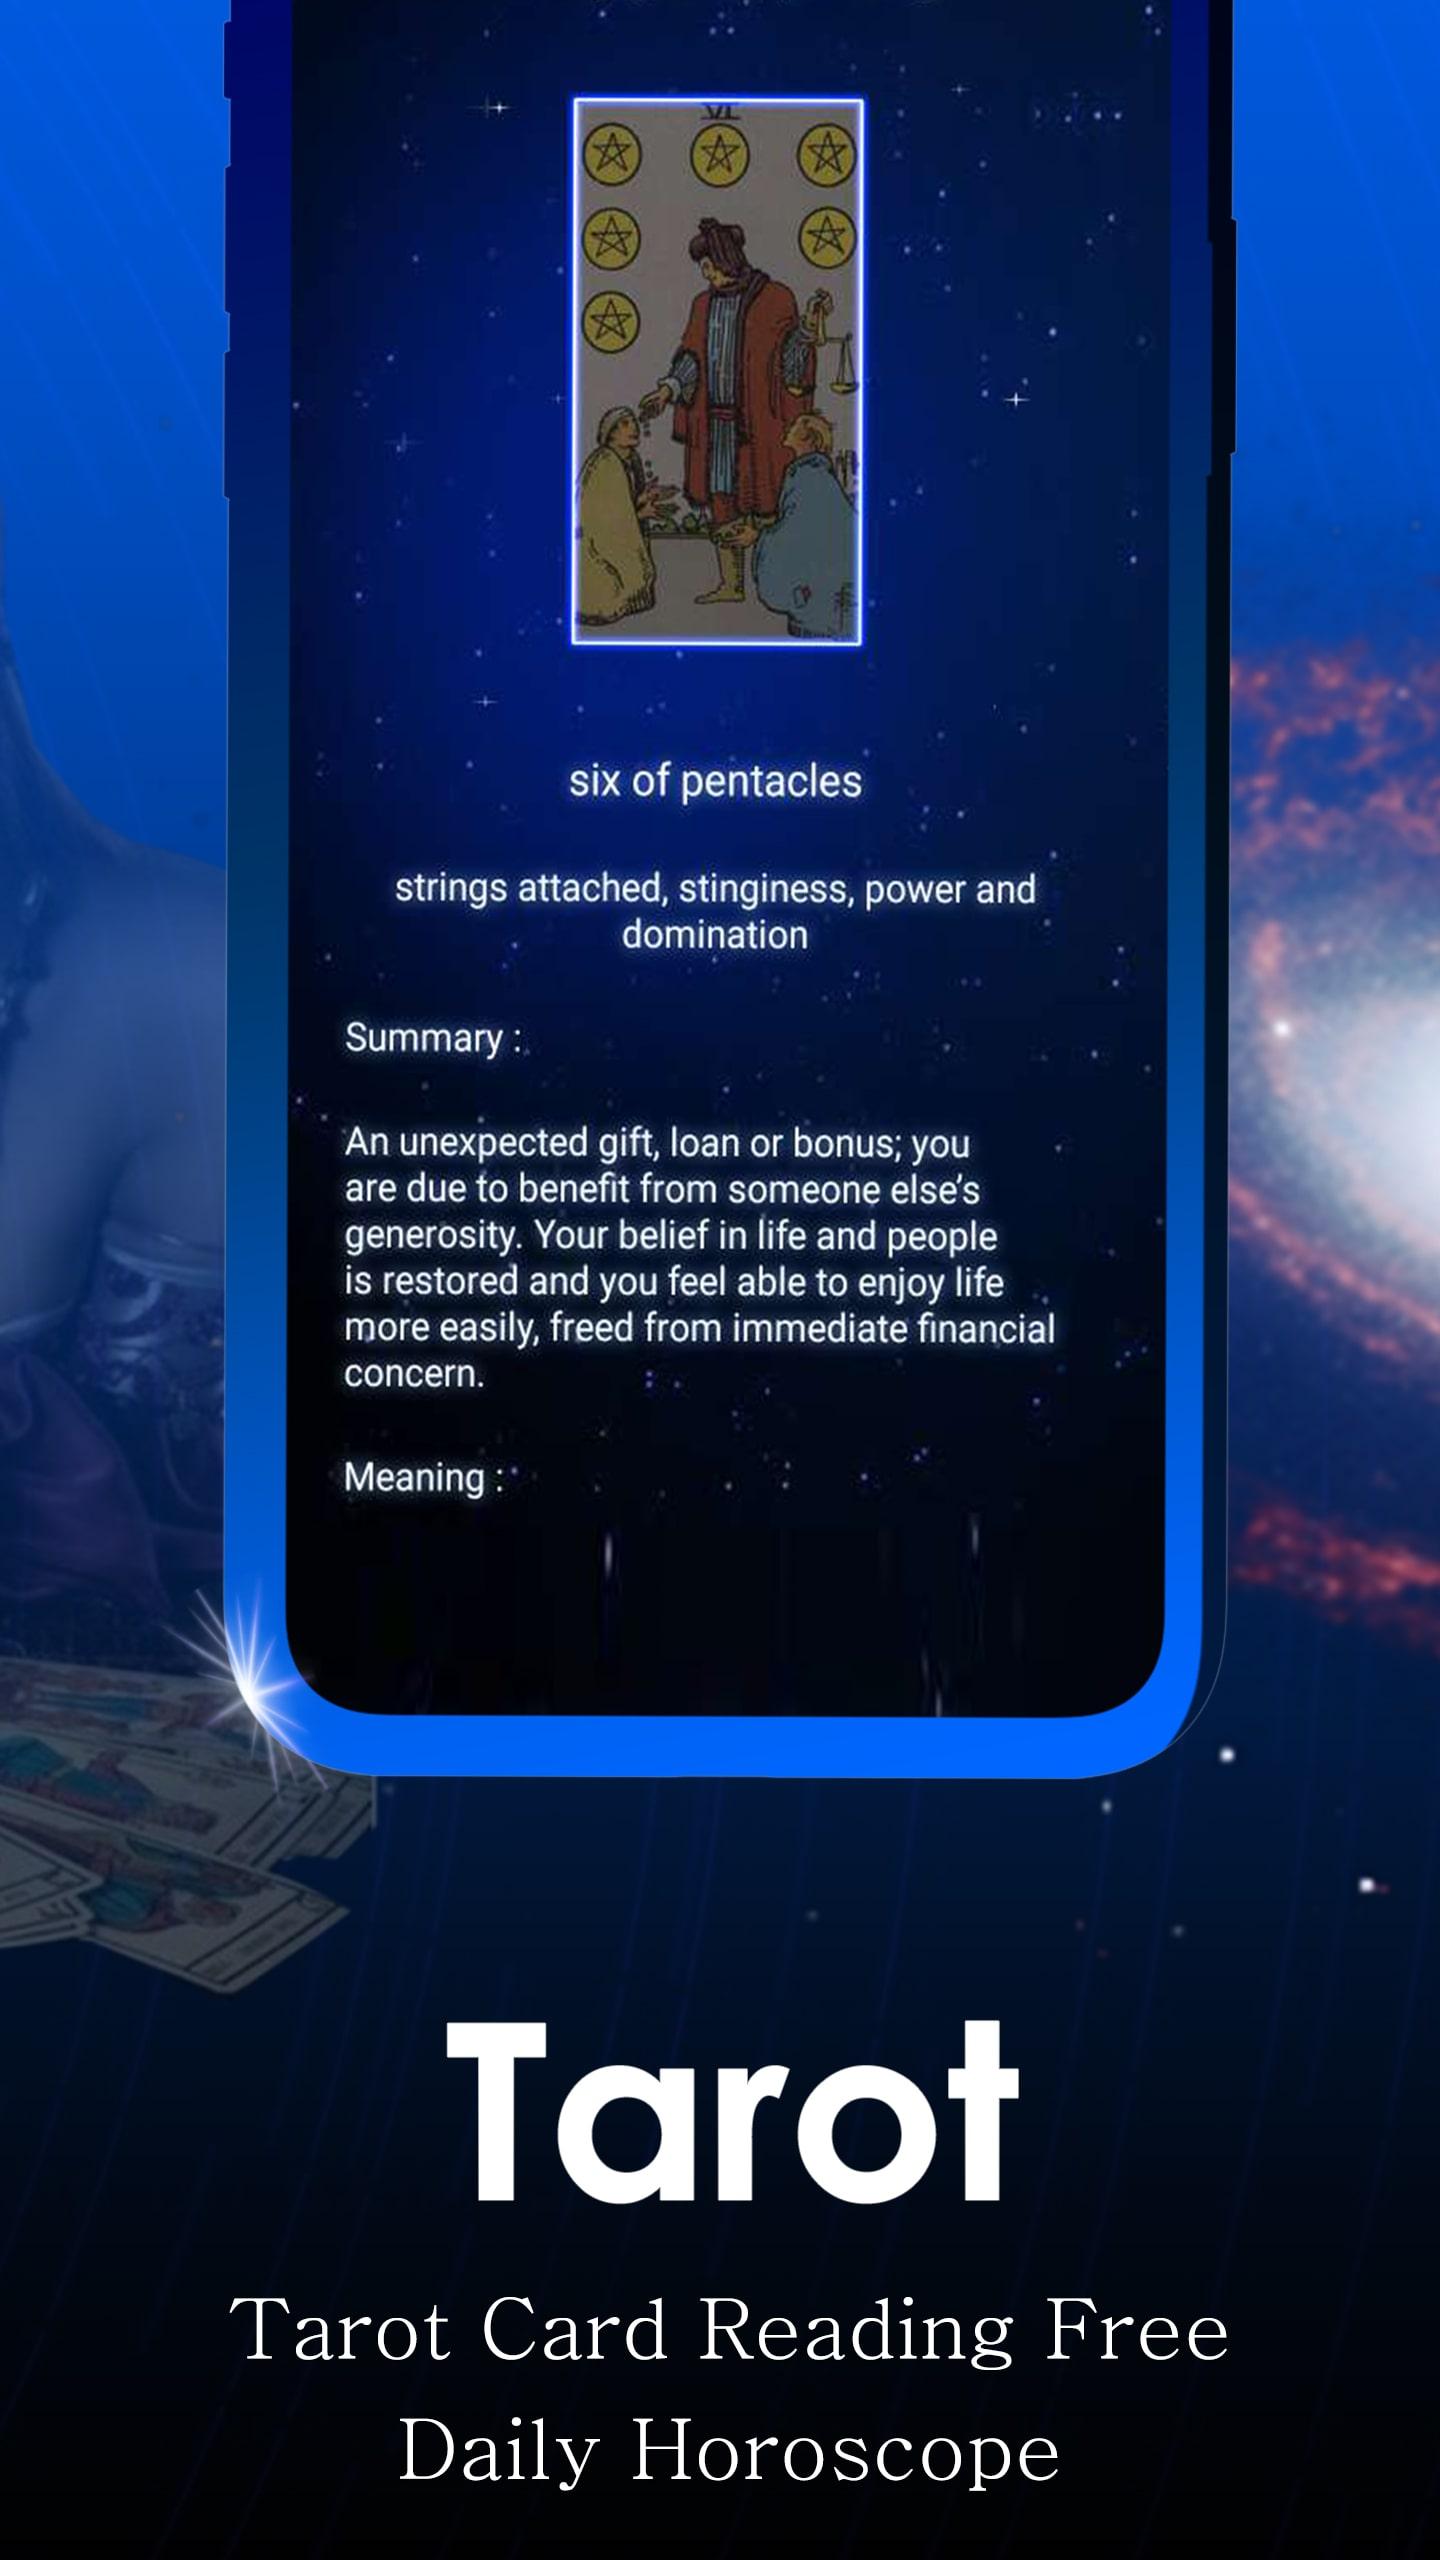 Tarot Card Reading Free - Daily Horoscope for Android - APK Download